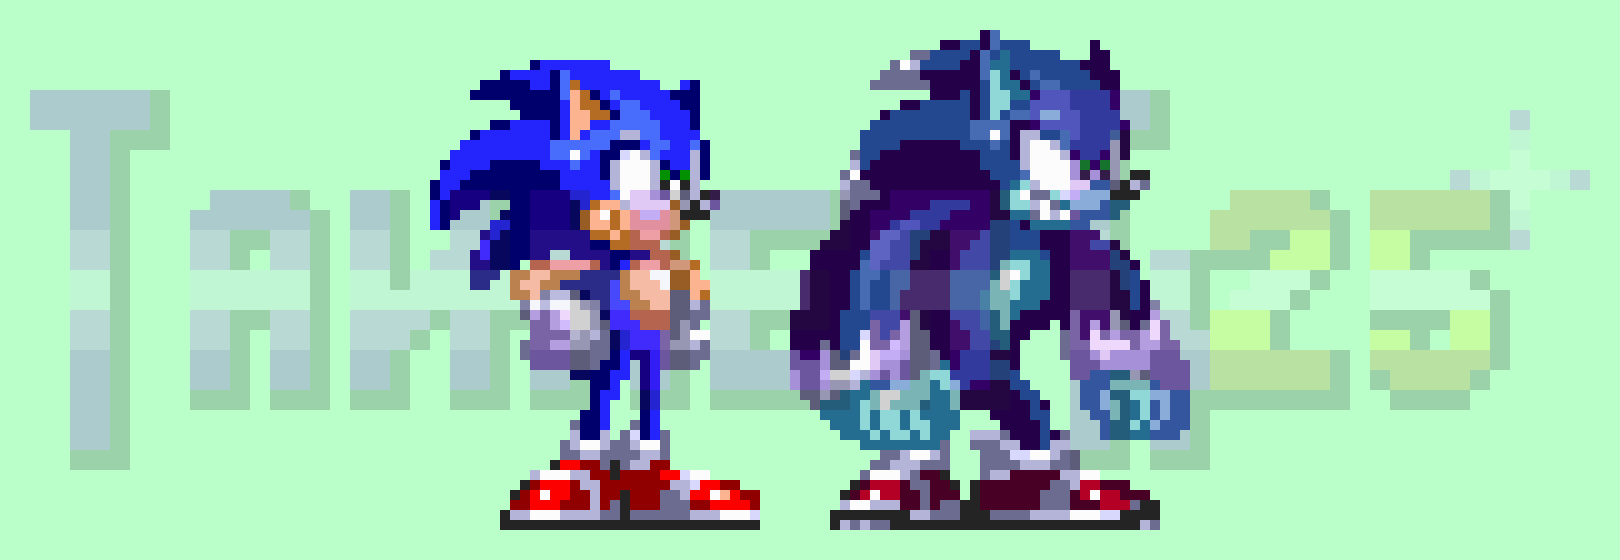 Dark Sonic in Sonic 3 A.I.R [Sonic 3 A.I.R.] [Mods]